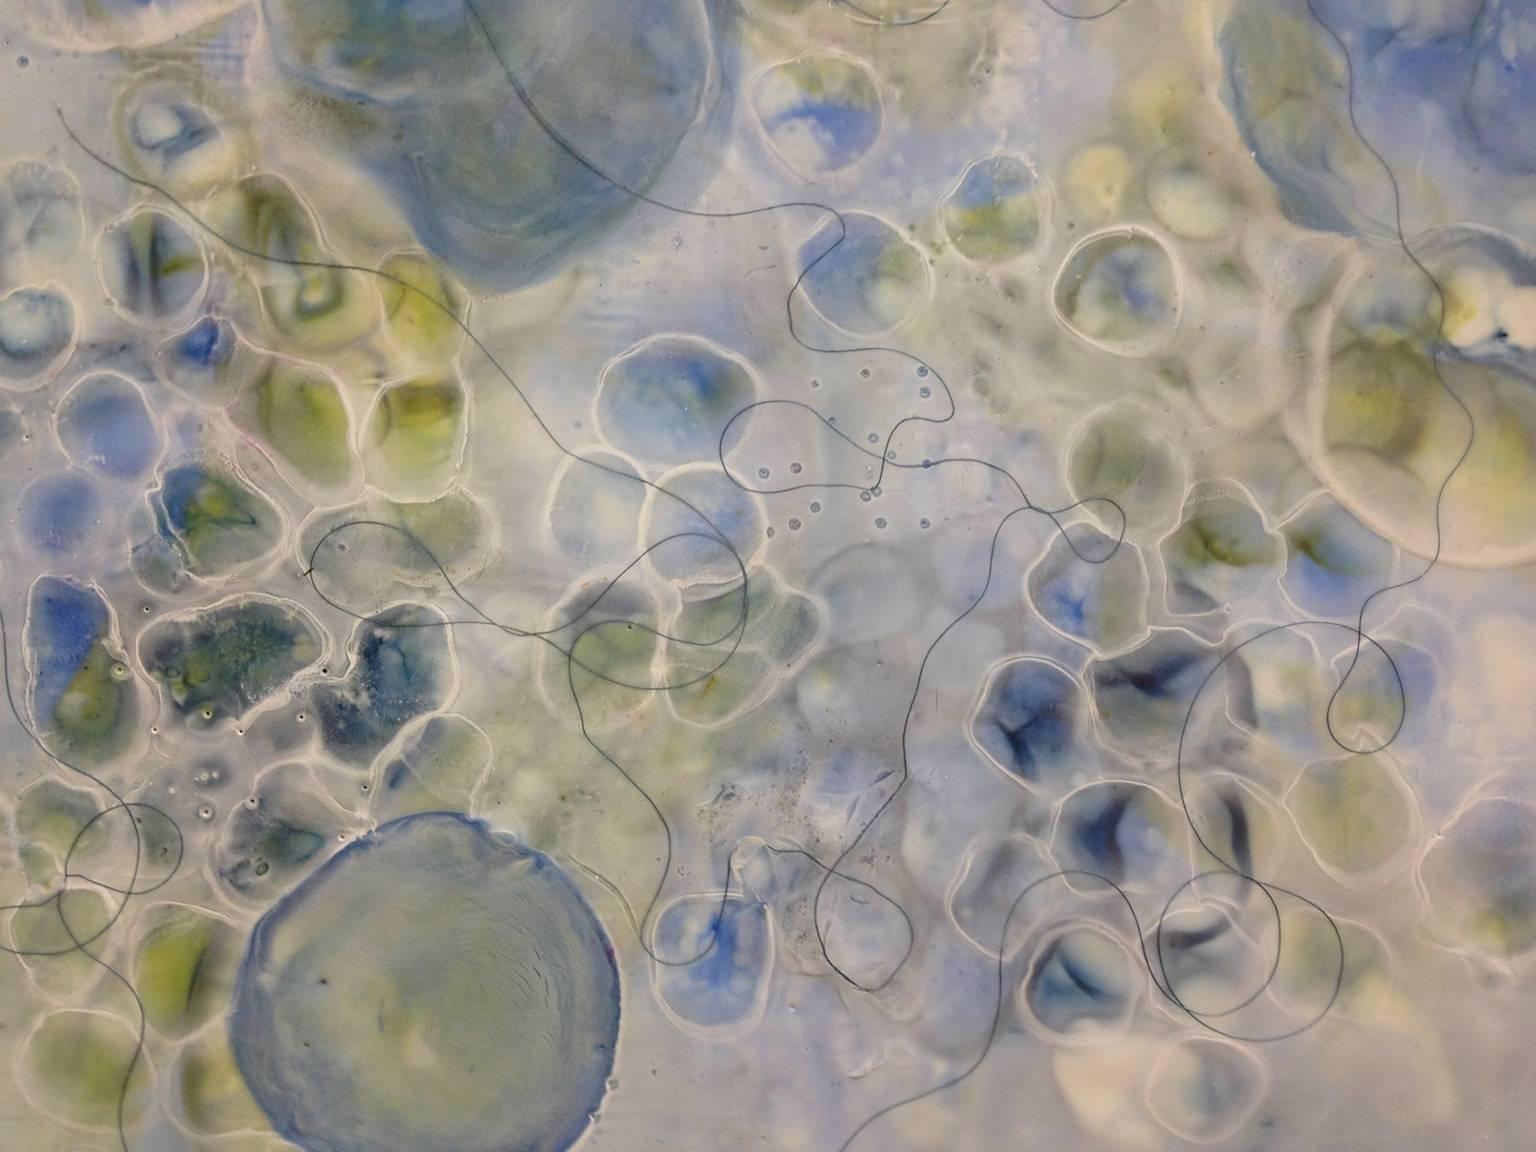 Kay Hartung’s “Bio Flow 3” is a 16 x 16 inch mixed media painting incorporating encaustic and pastel composed of microscopic images actively forming connections in blues, greens and whites, with actual thread embedded in the surface. The painting